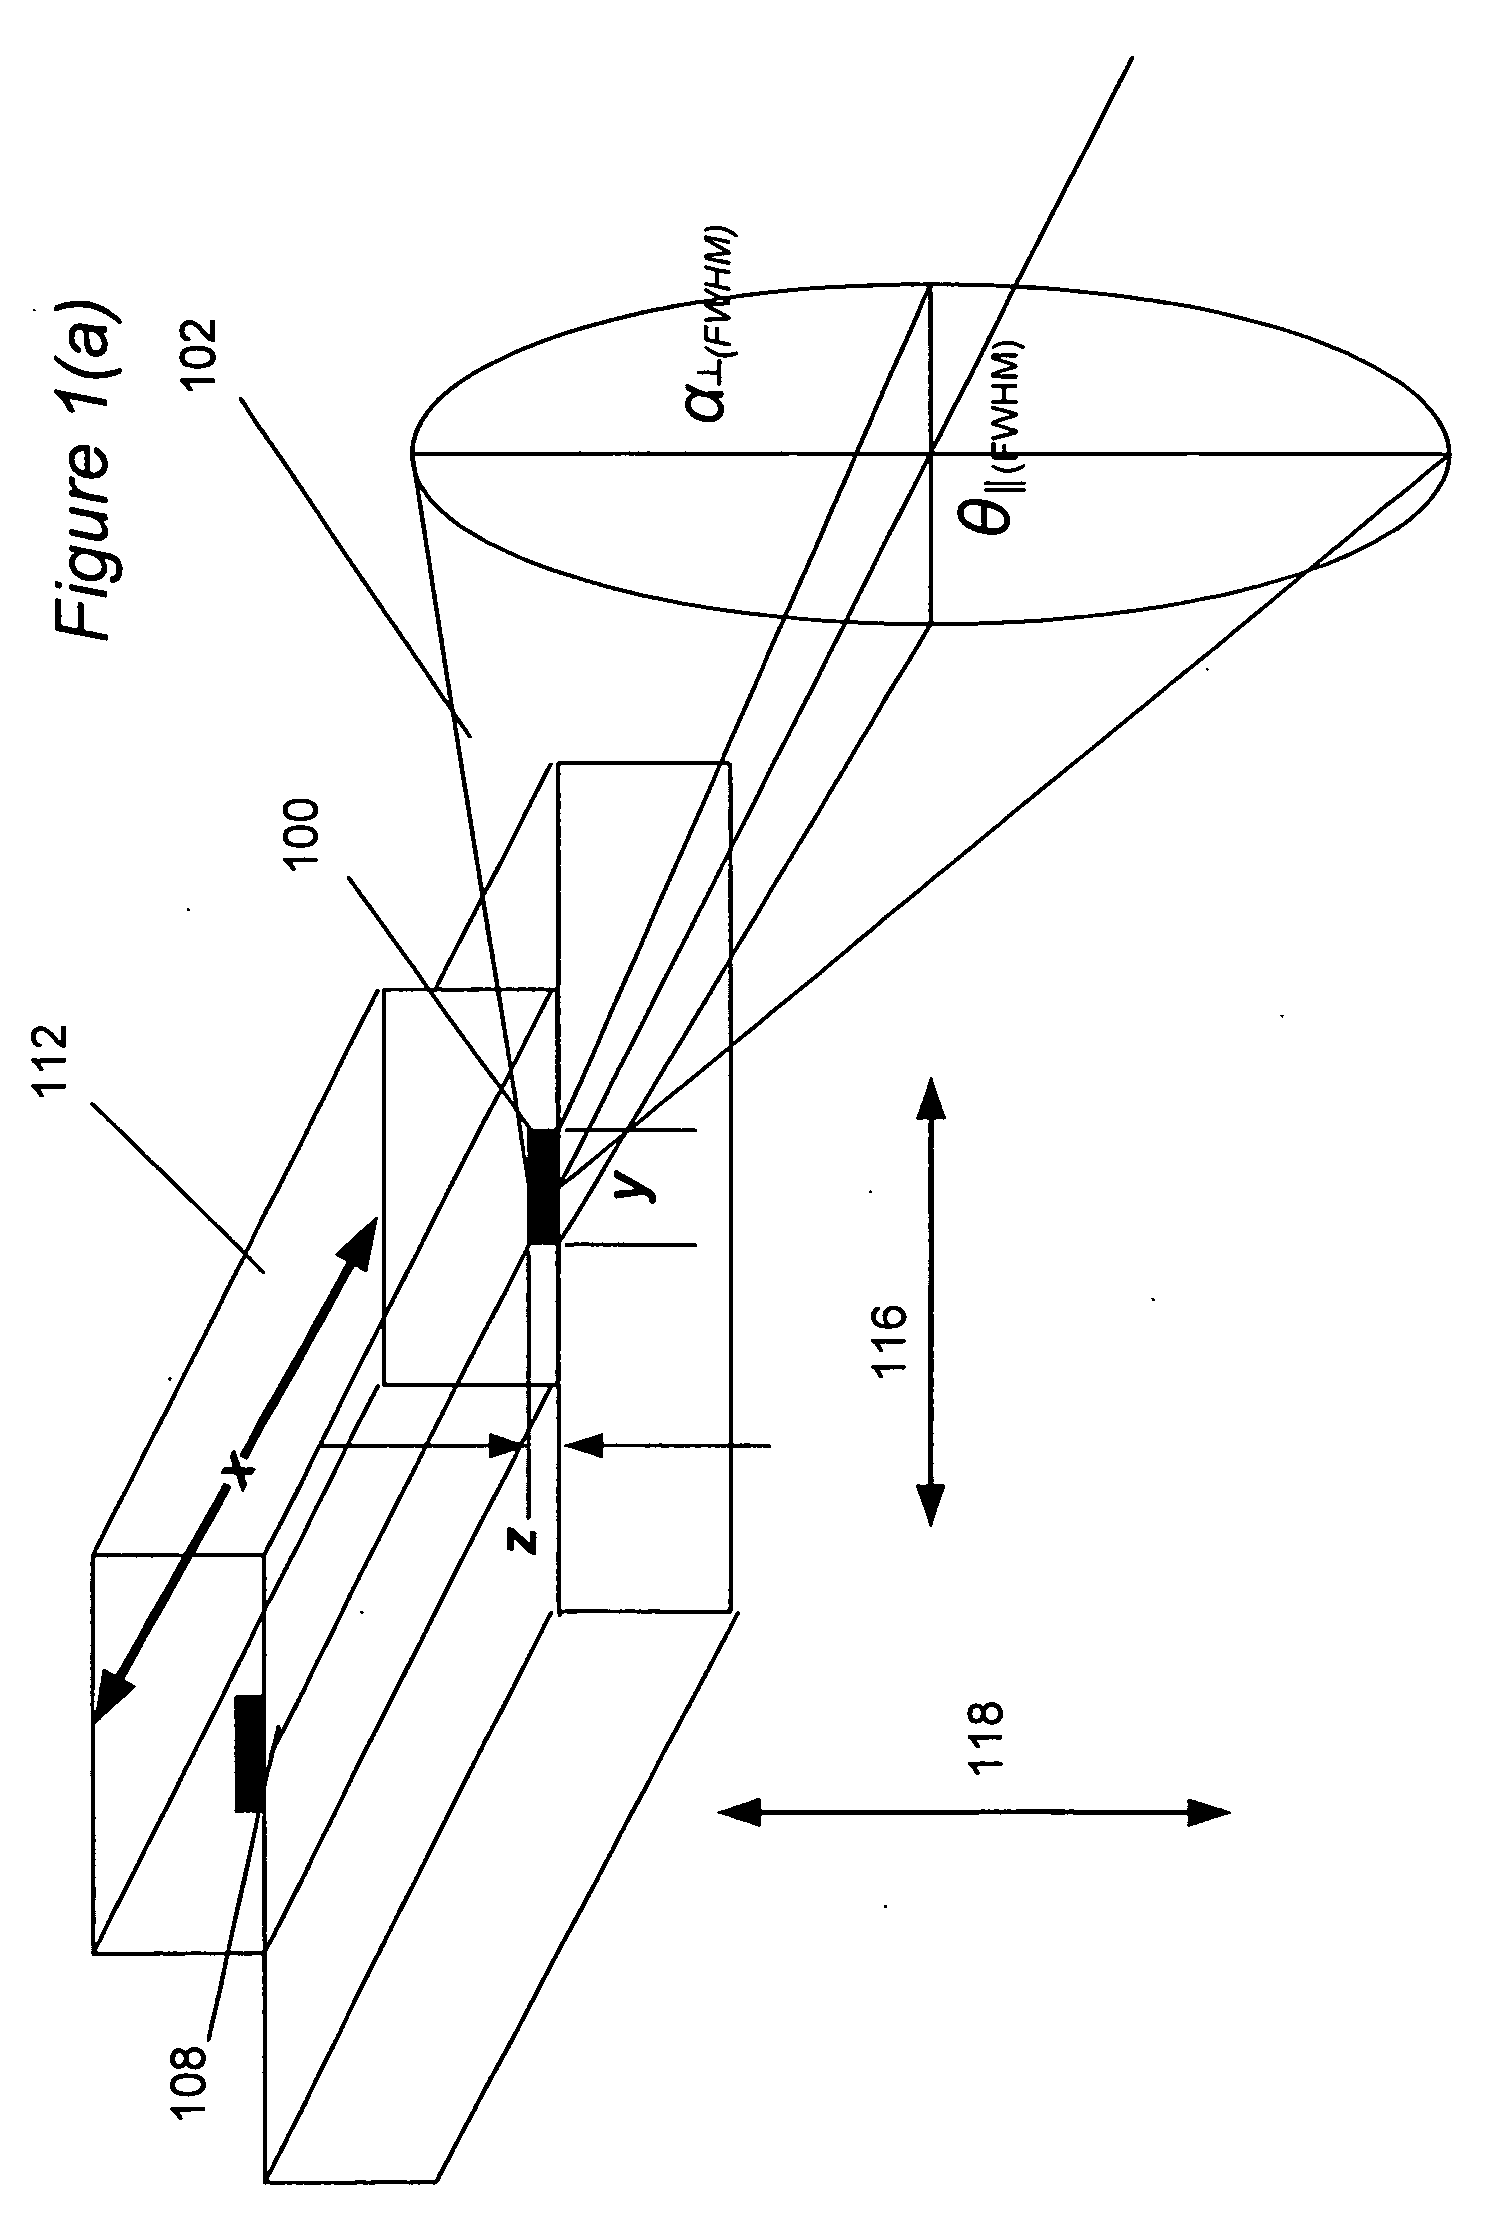 System and method for generating intense laser light from laser diode arrays